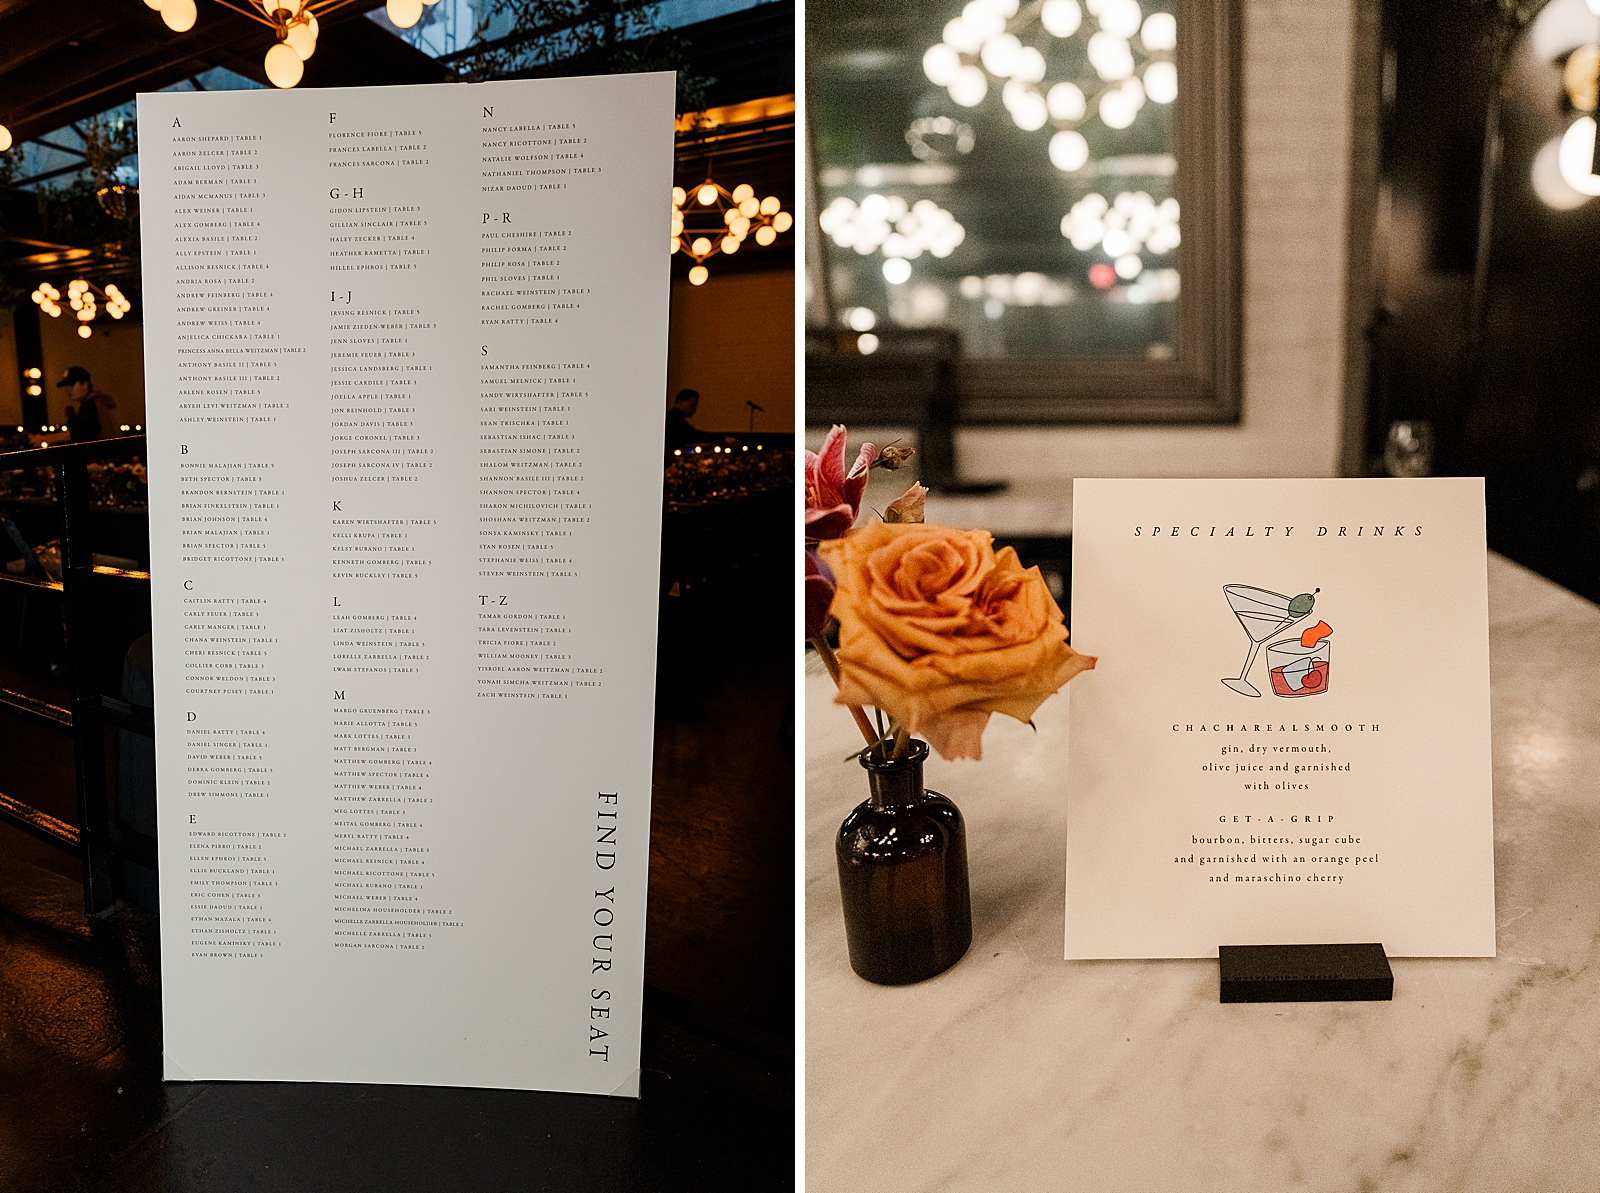 Left photo: Full shot of the seating chart.
Right photo: Close up shot of the couple's custom cocktail menu. 